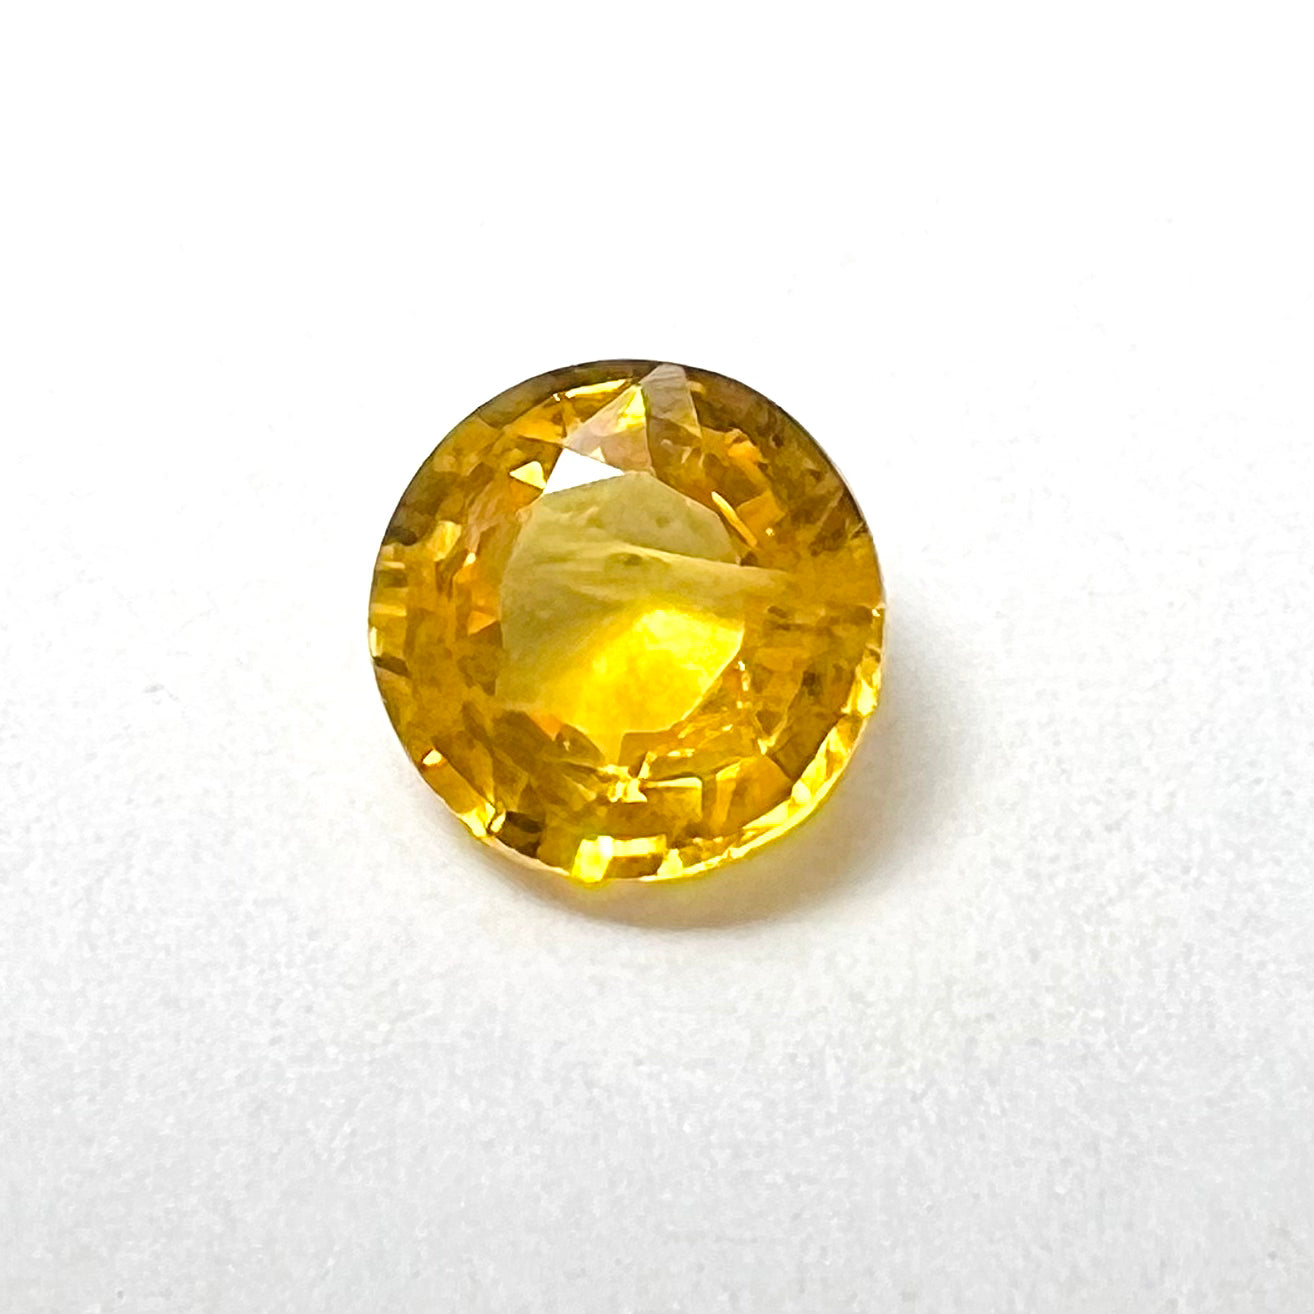 .56CT Loose Natural Round Sapphire 5x2.5mm Earth mined Gemstone